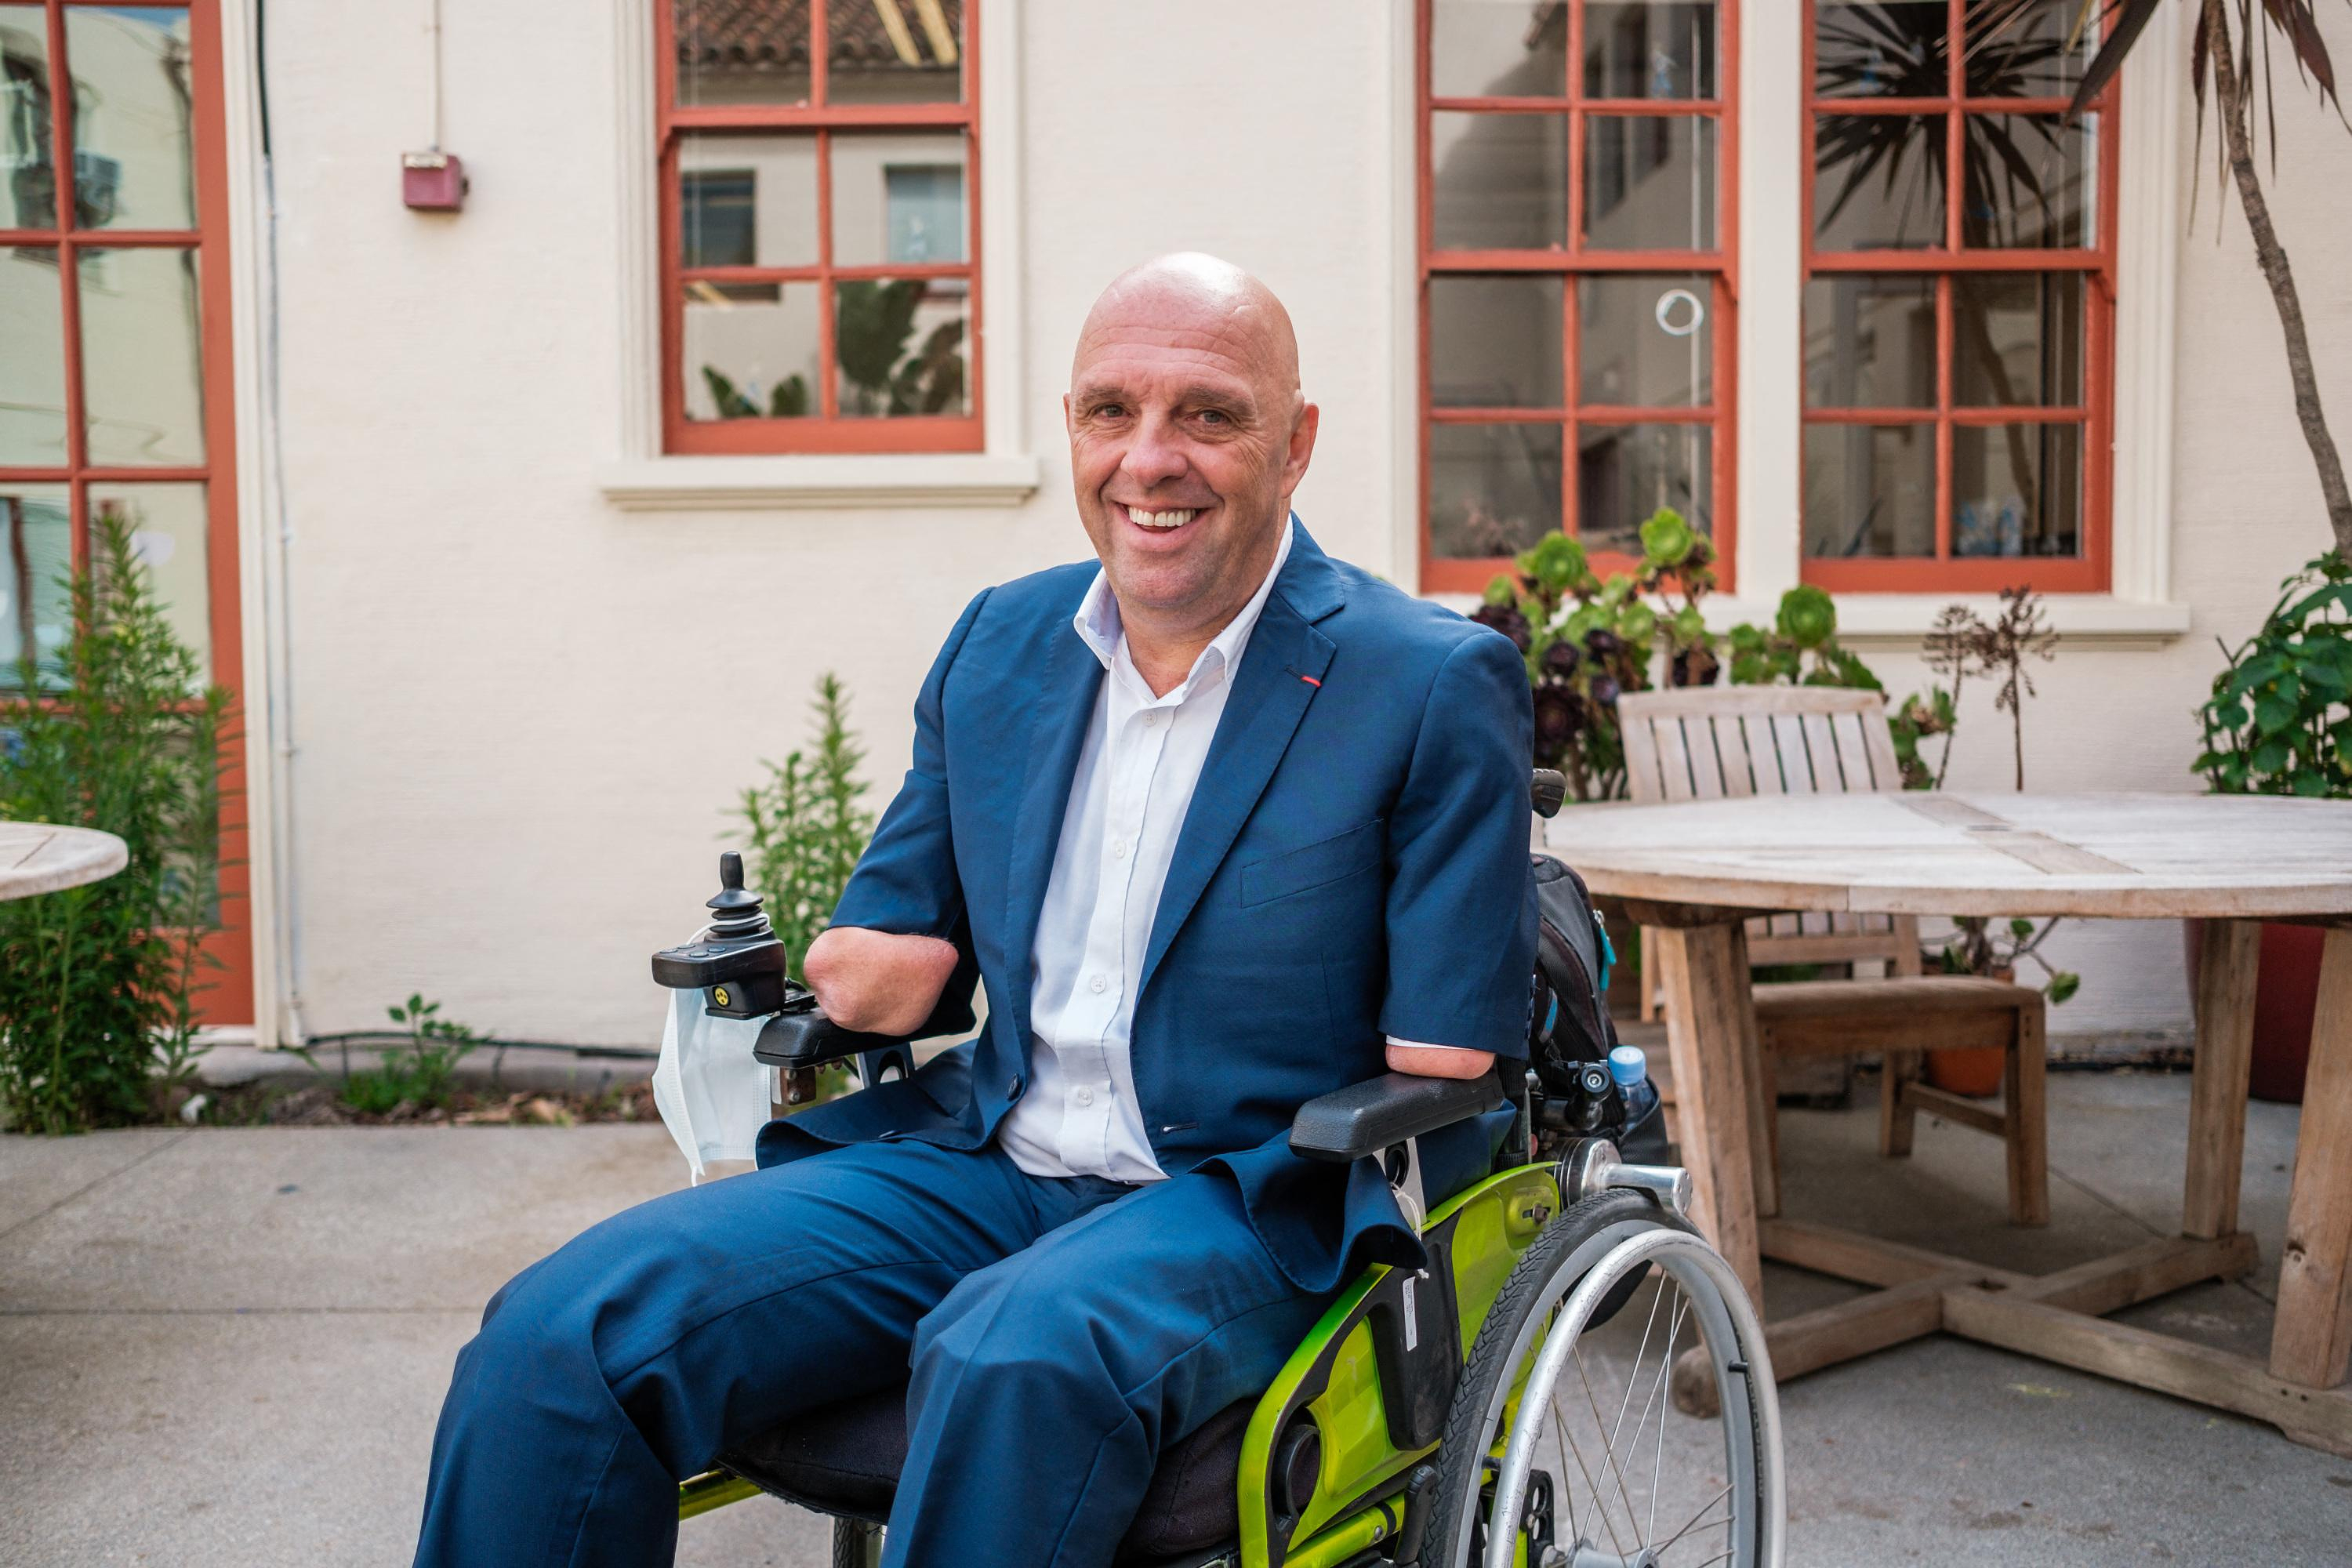 Philippe Croizon launches an application to help disabled people find a parking space